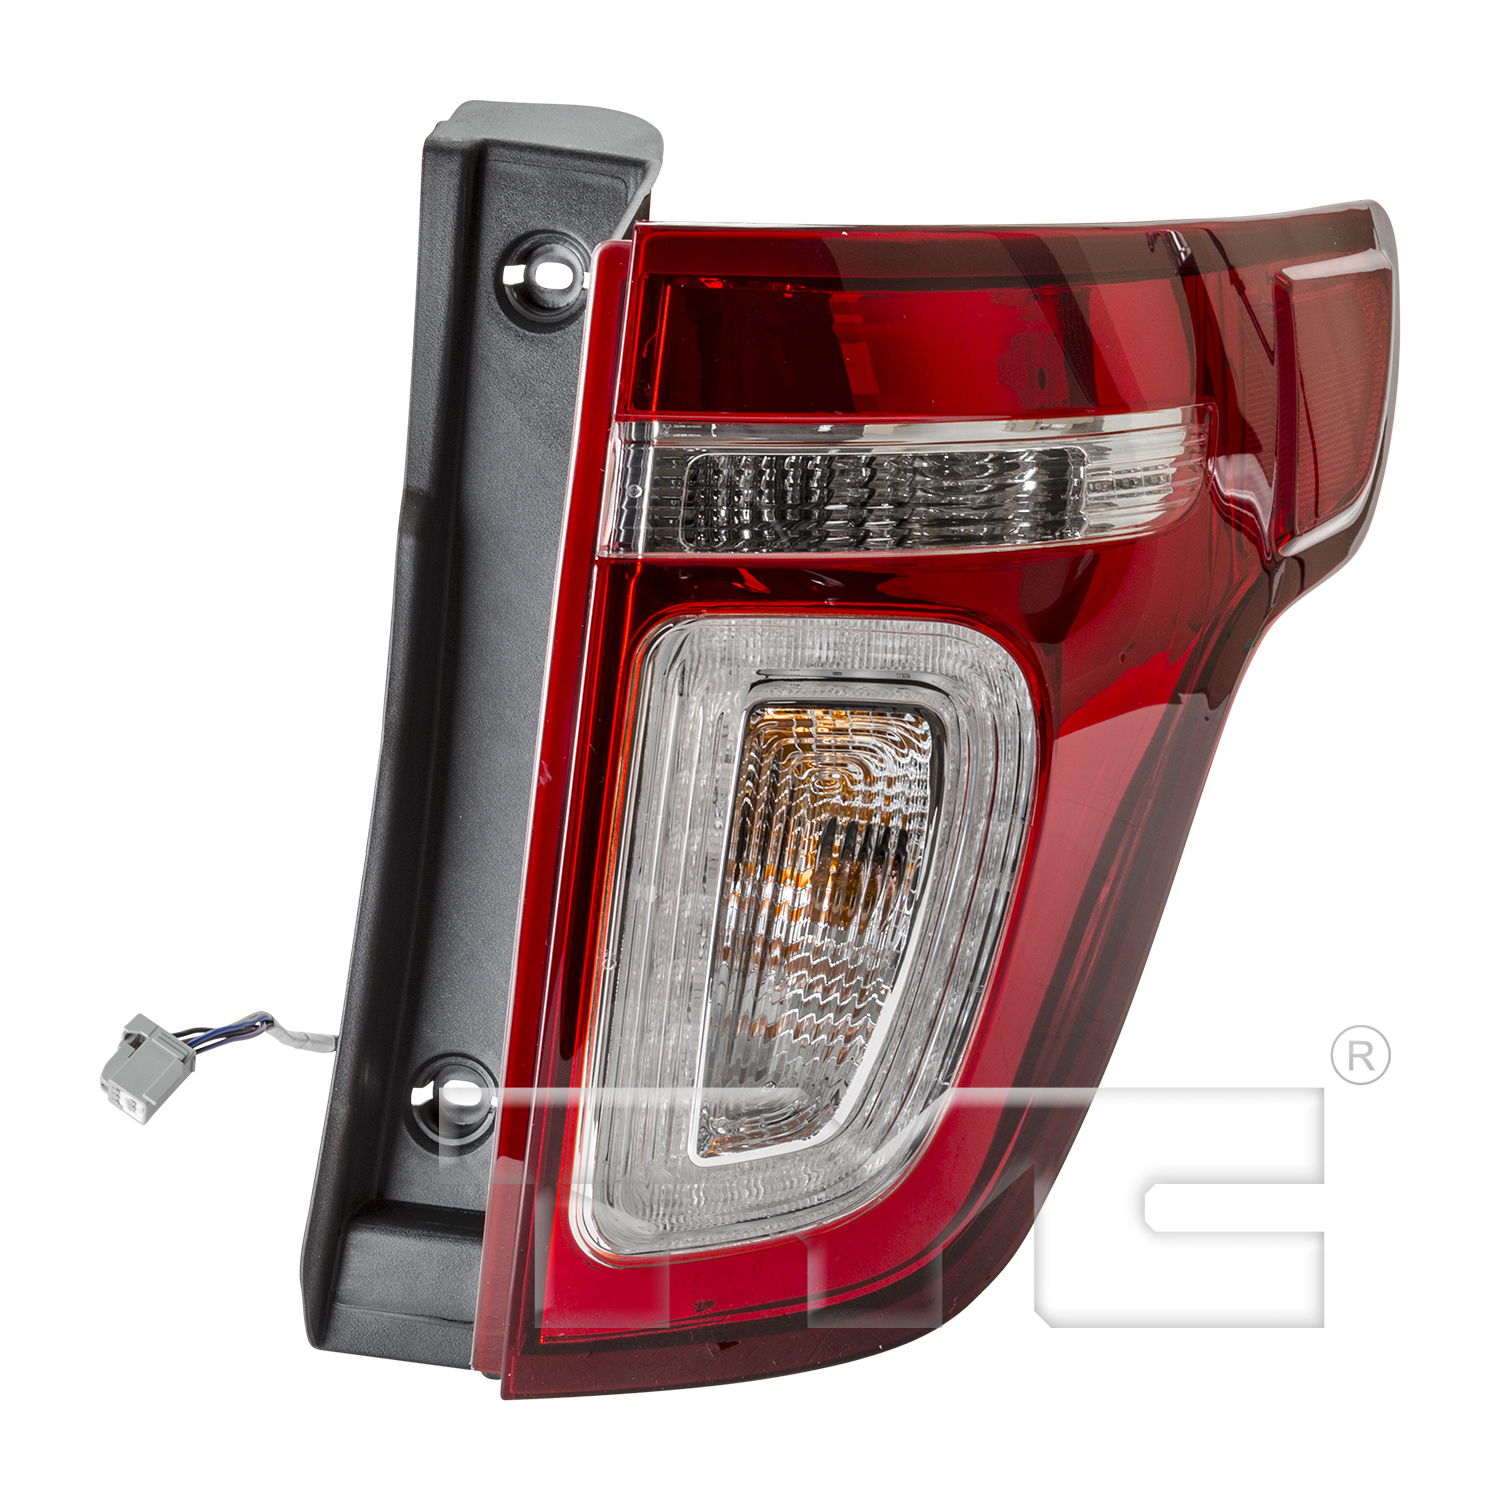 Aftermarket TAILLIGHTS for FORD - EXPLORER, EXPLORER,11-15,RT Taillamp assy